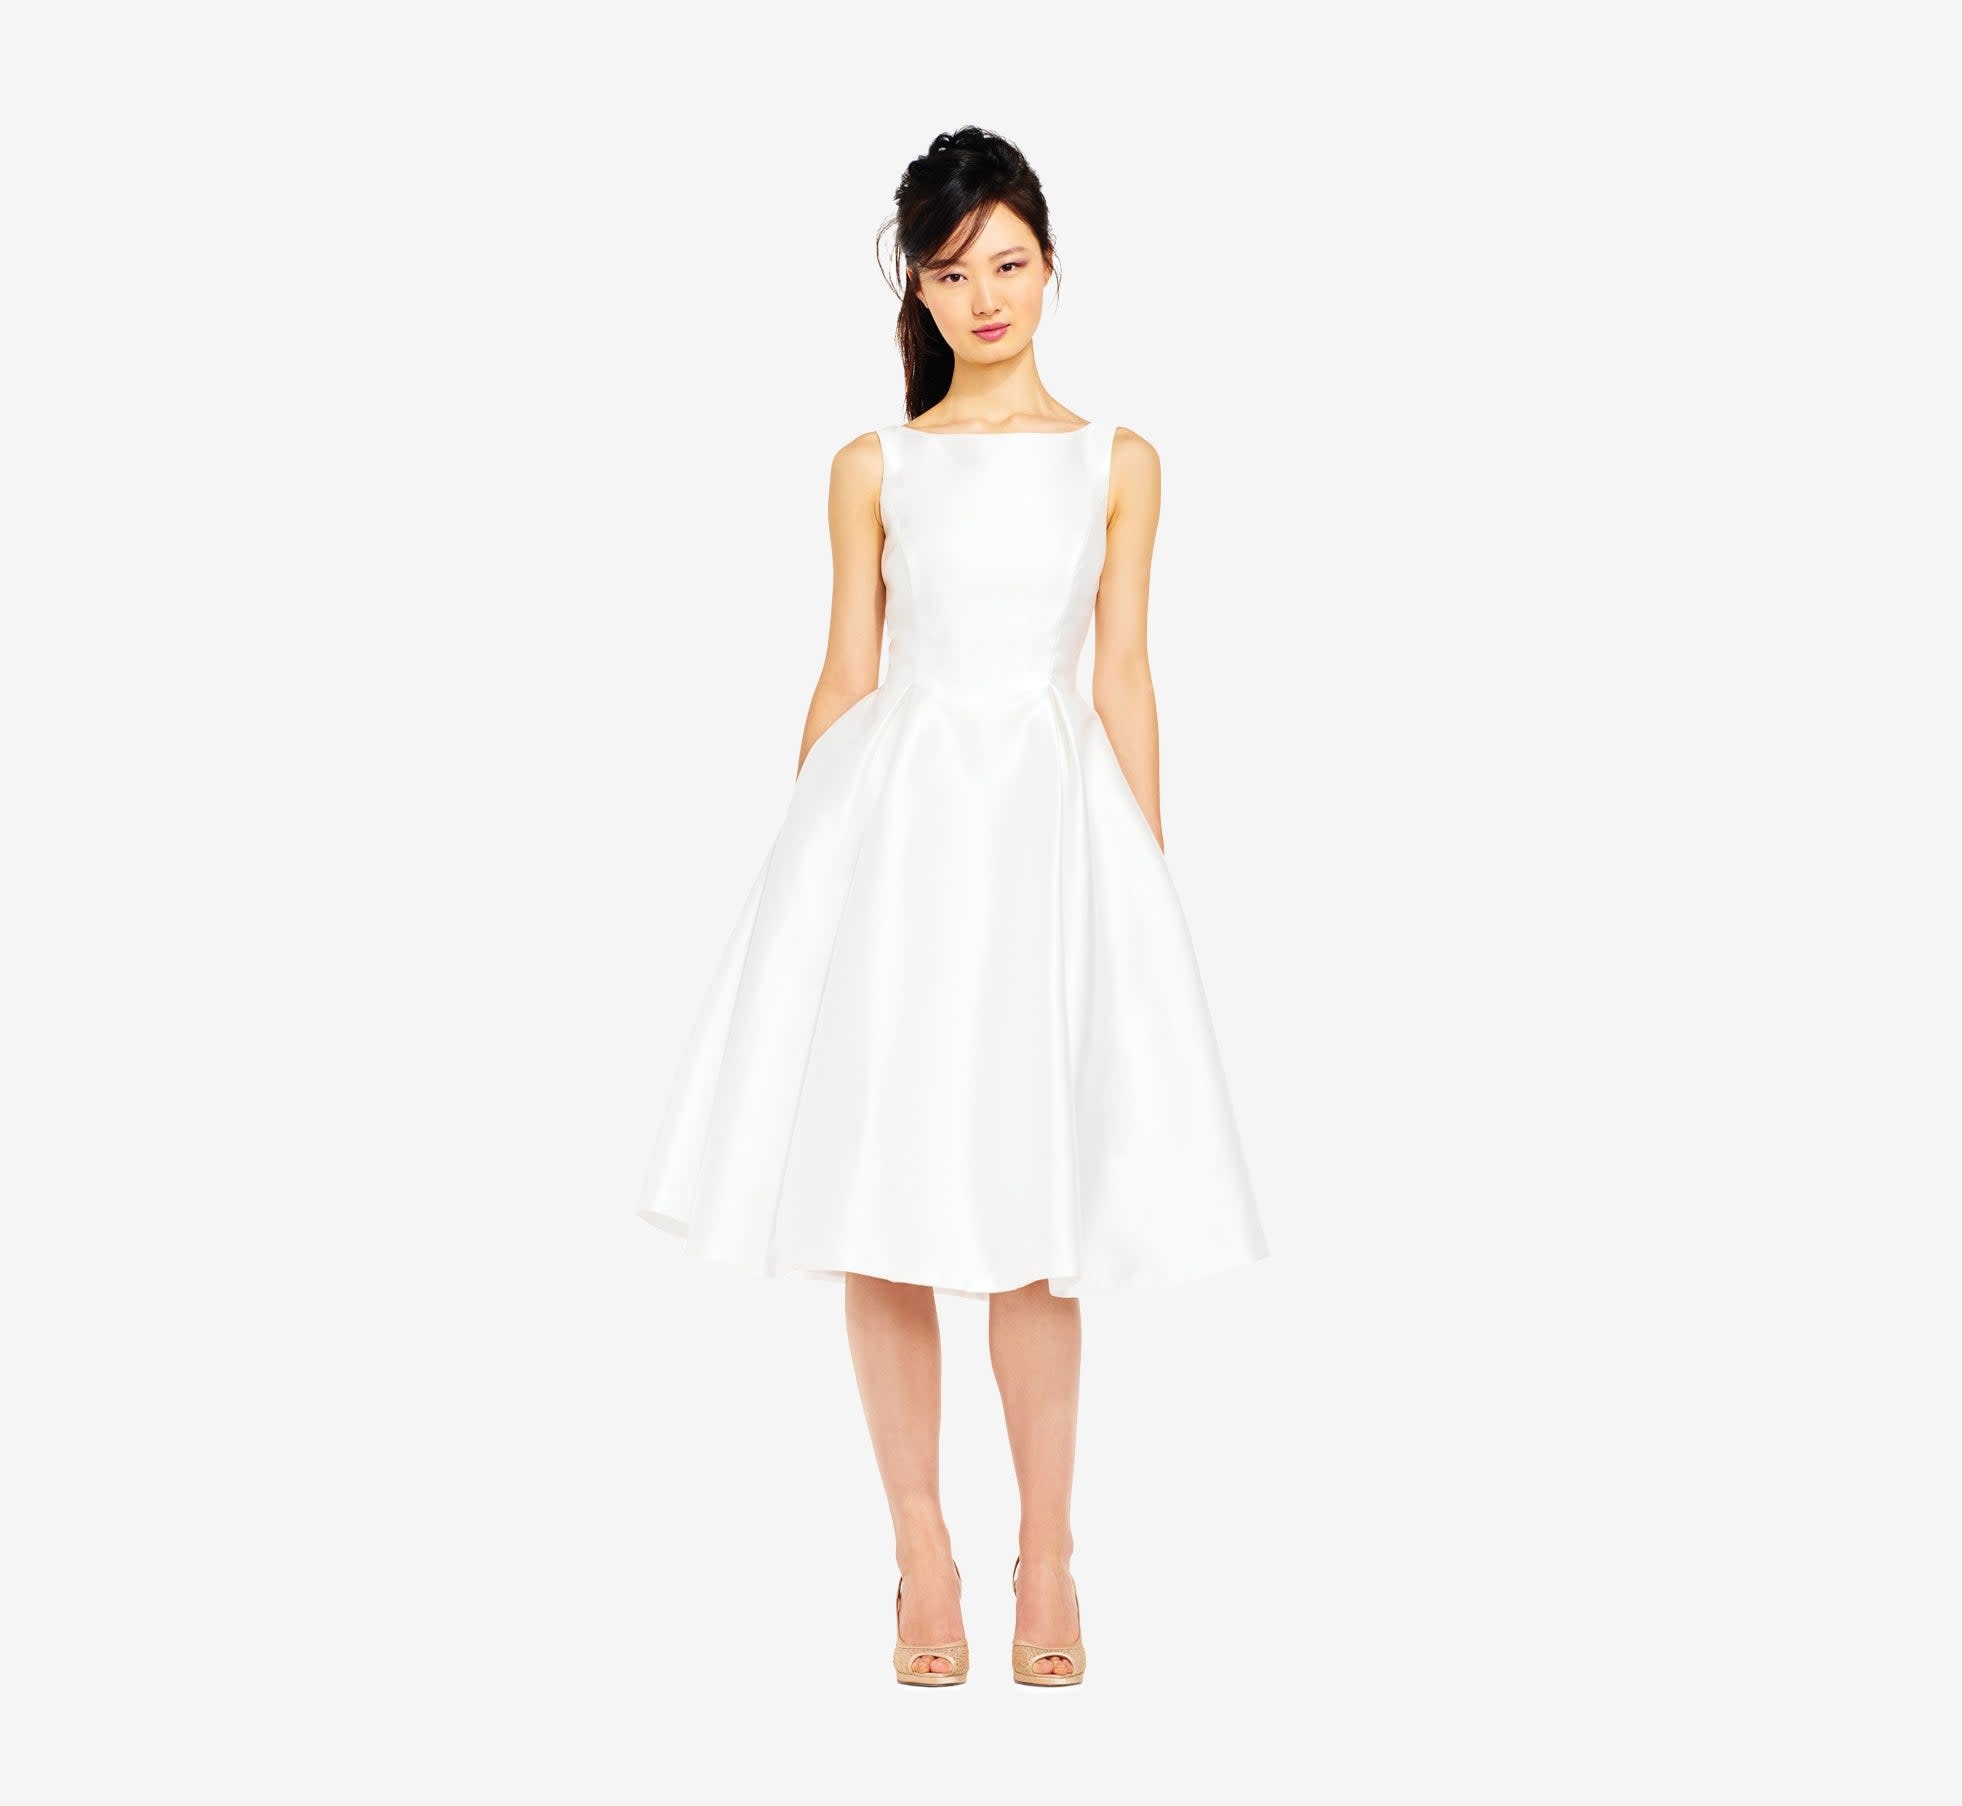 ADRIANNA PAPELL ADRIANNA PAPELL SLEEVELESS COCKTAIL DRESSES